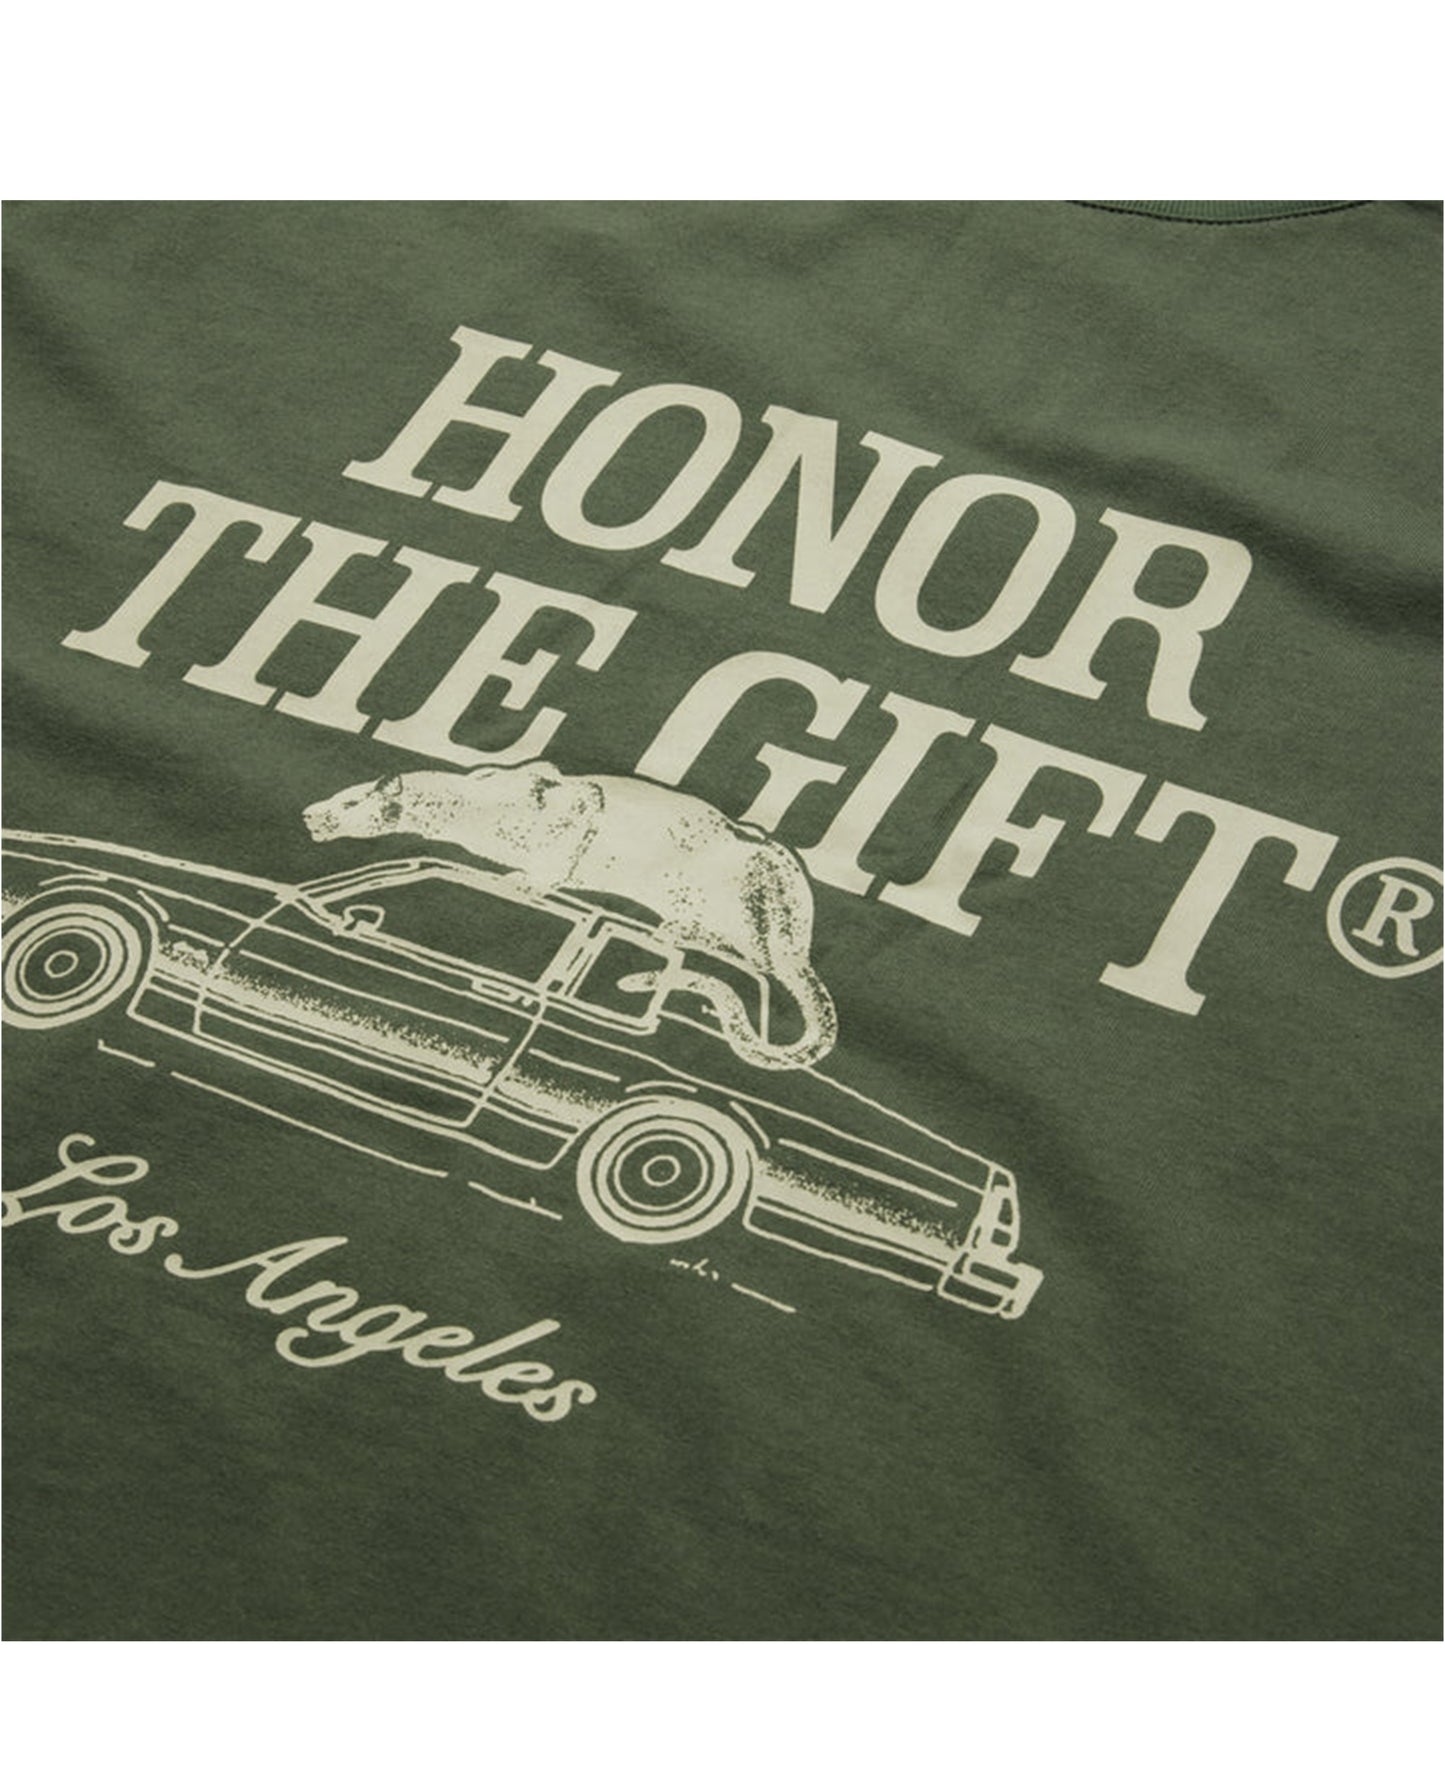 honor the gift t shirt